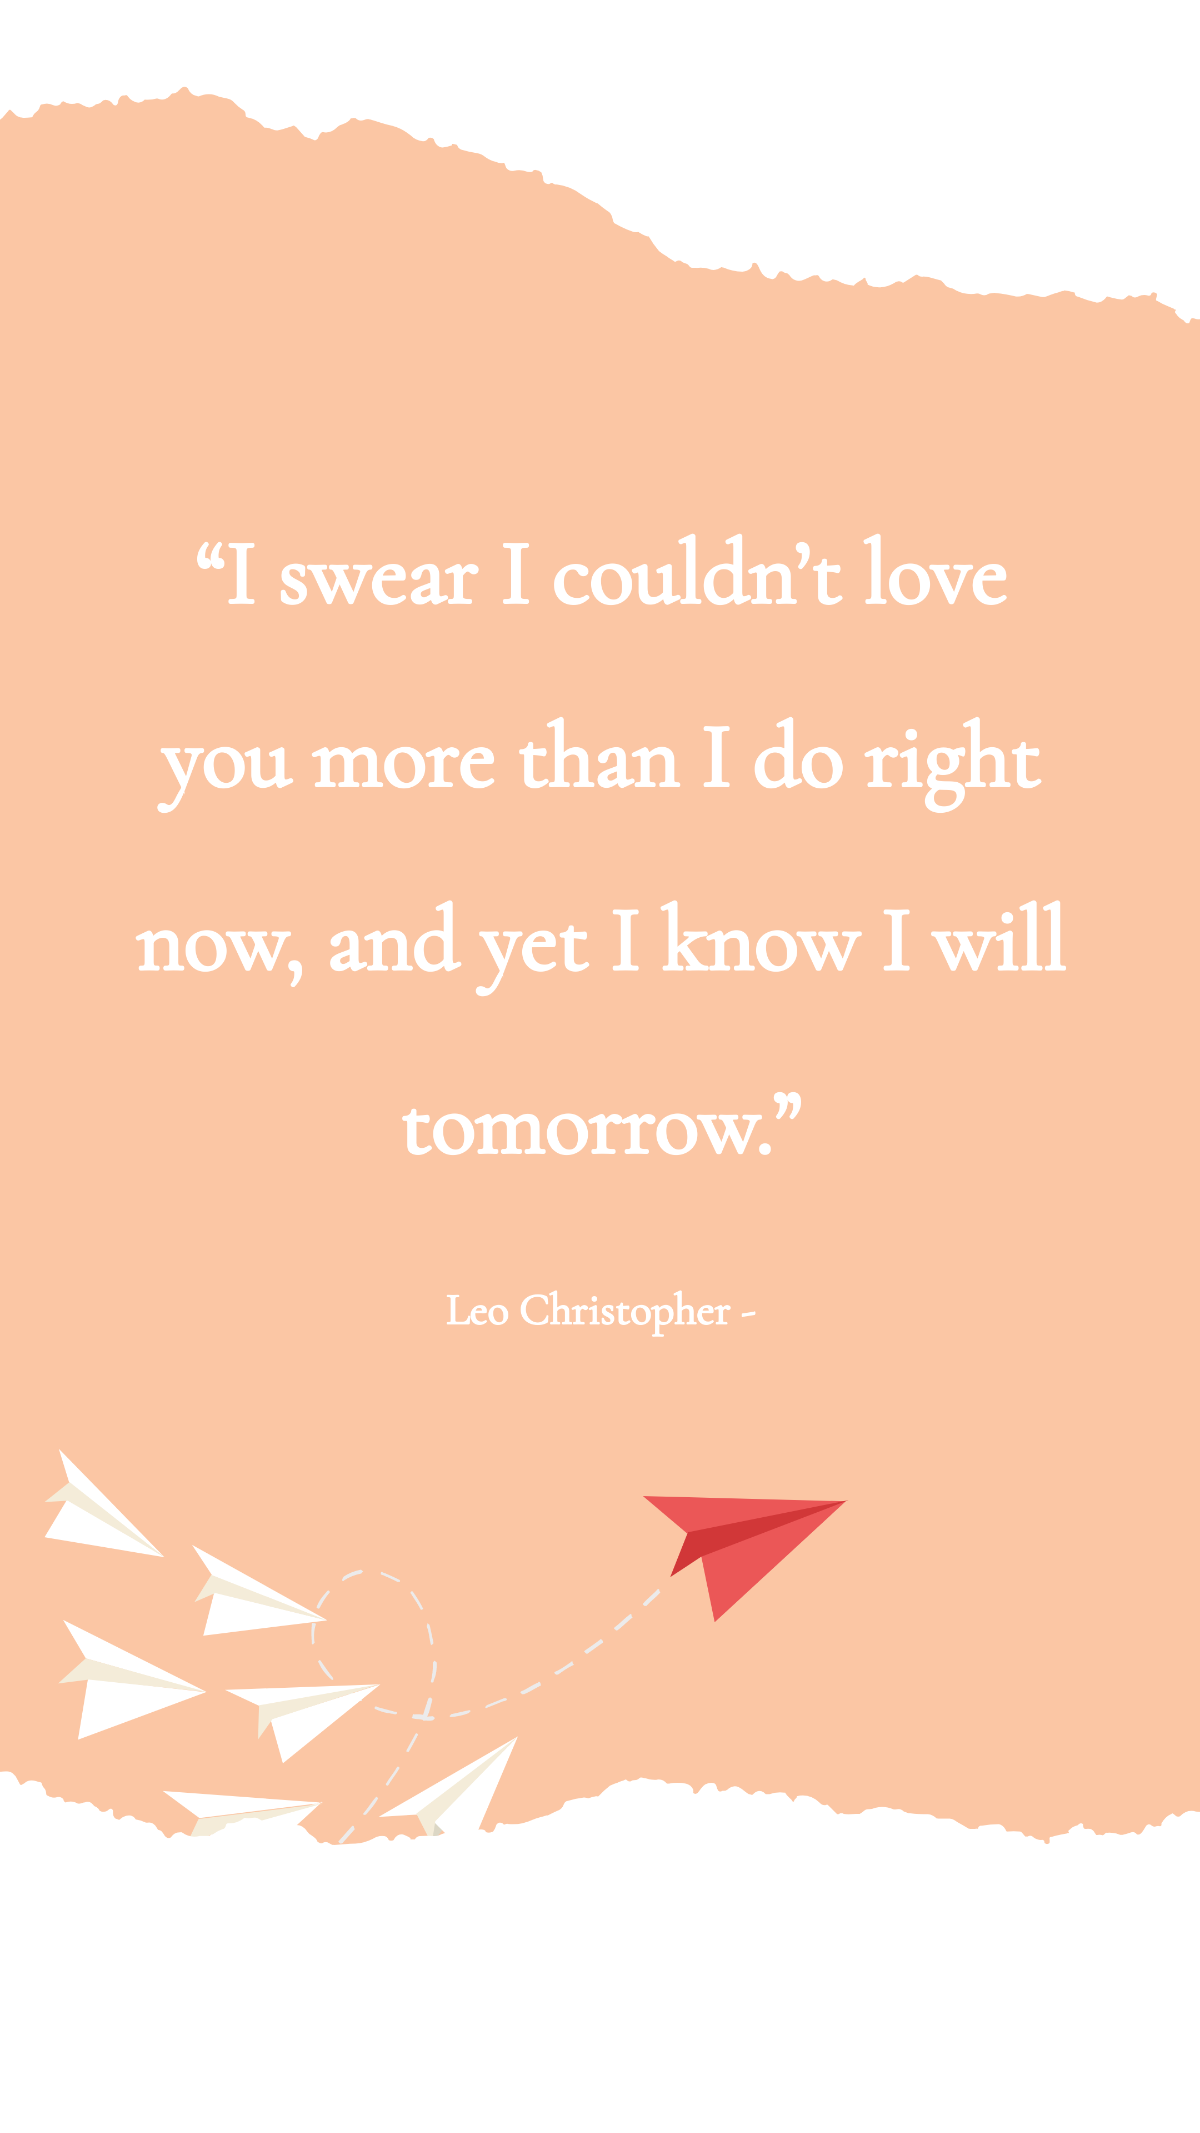 Free Leo Christopher - “I swear I couldn’t love you more than I do right now, and yet I know I will tomorrow.” Template